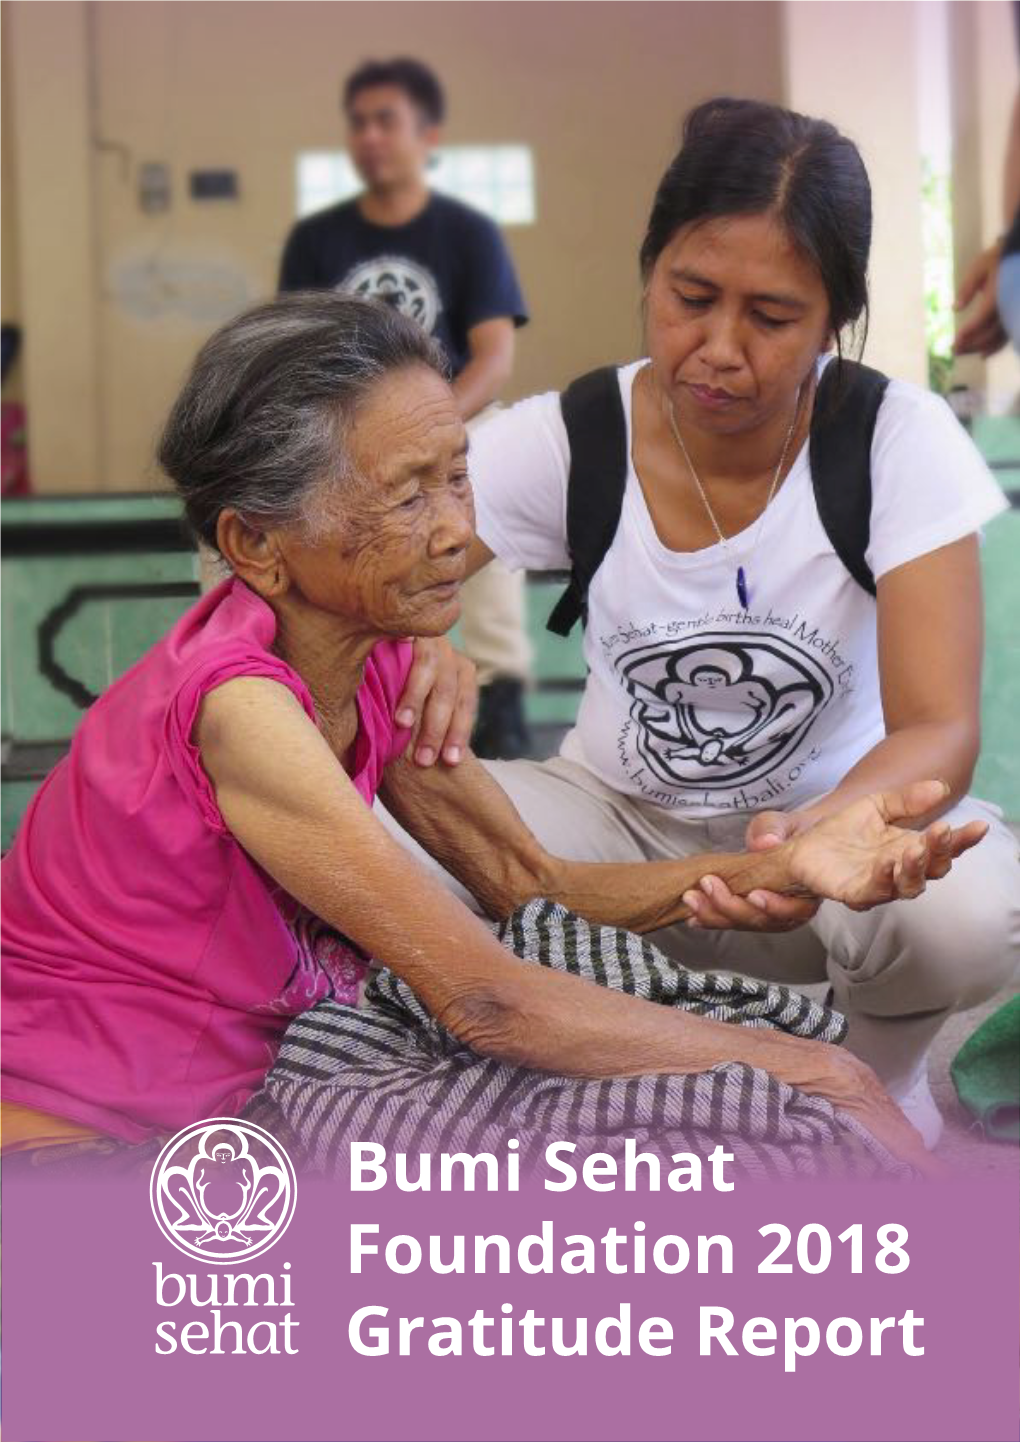 Bumi Sehat Foundation 2018 Gratitude Report Bumi Sehat Healthy Mother Earth Foundation 2018 Field Report Prepared by Ibu Robin